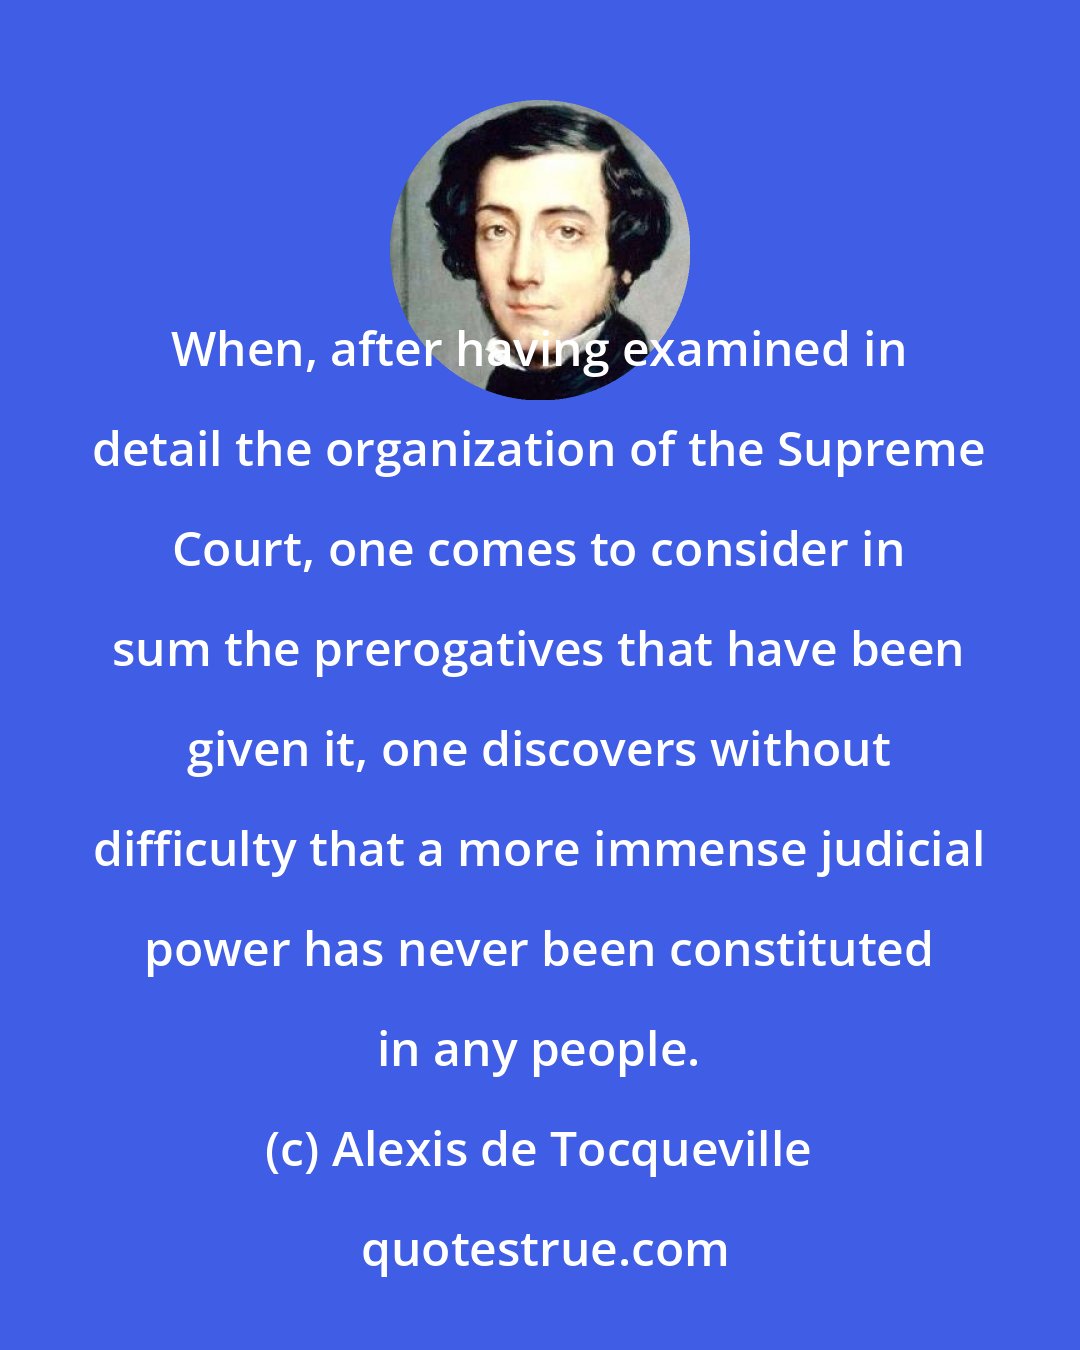 Alexis de Tocqueville: When, after having examined in detail the organization of the Supreme Court, one comes to consider in sum the prerogatives that have been given it, one discovers without difficulty that a more immense judicial power has never been constituted in any people.